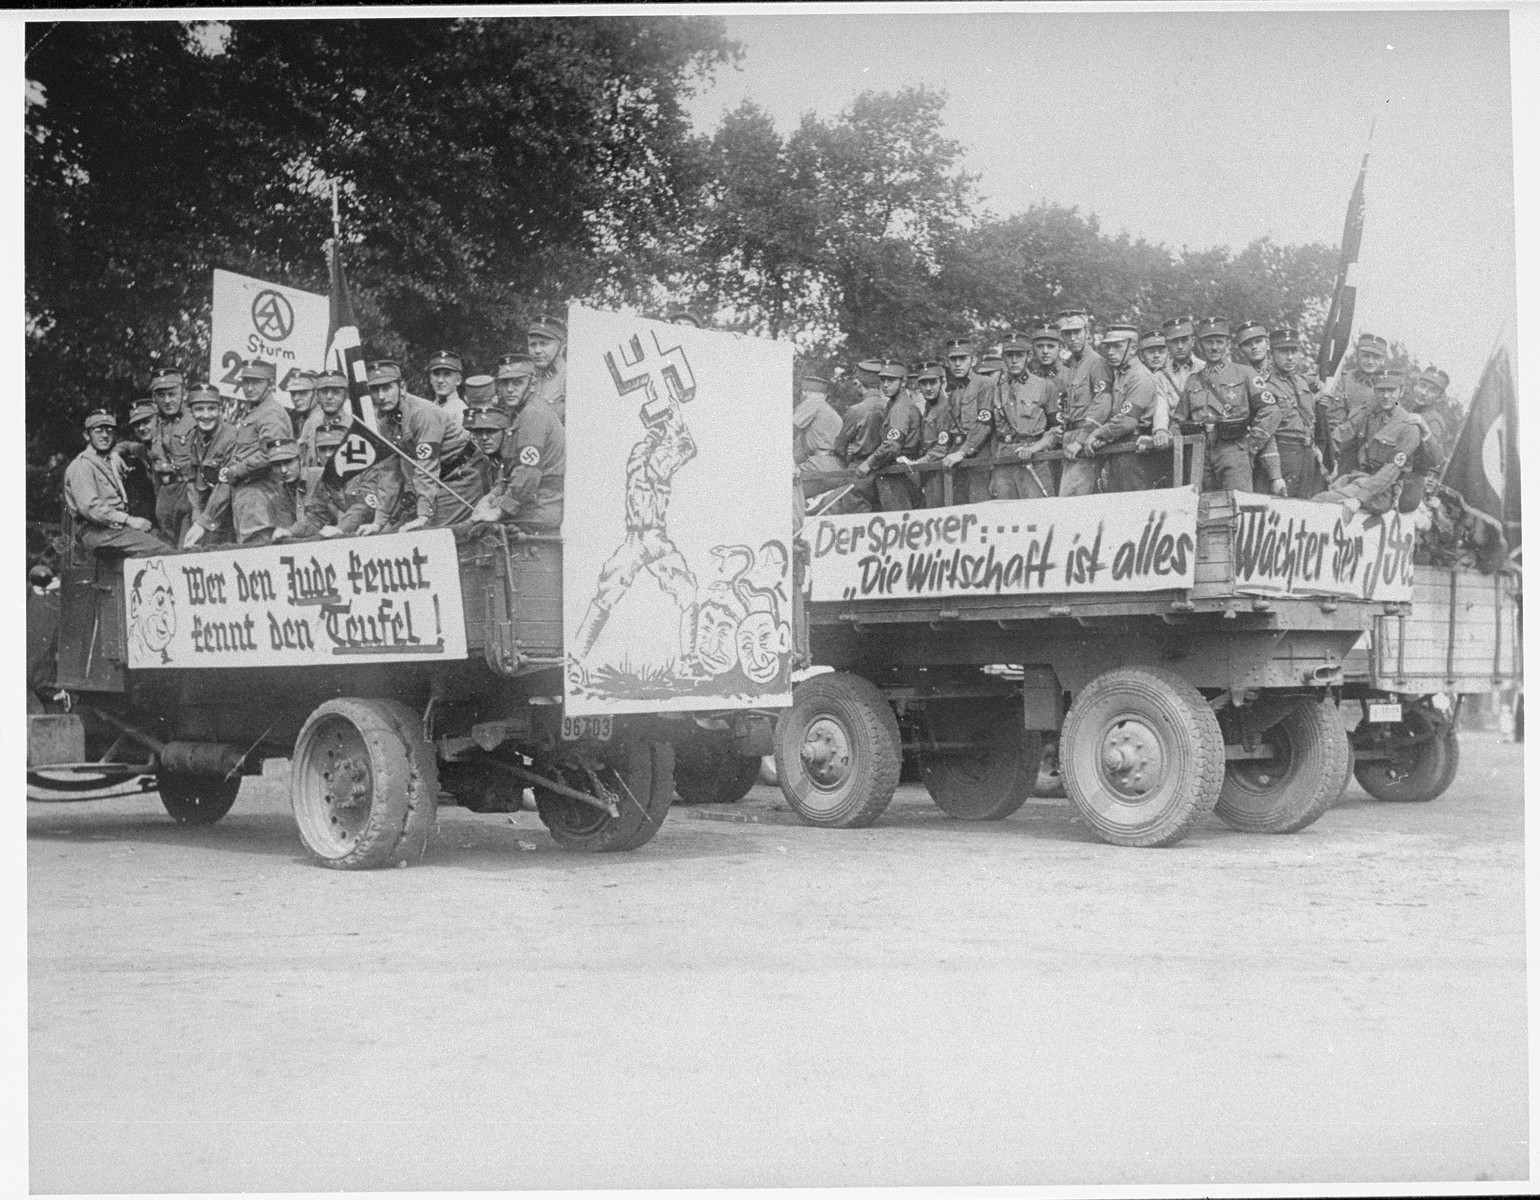 Members of the SA drive through the streets of Recklingshausen, Germany on propaganda trucks bedecked with anti-Jewish banners.

The banners read: "He who knows the Jew knows the Devil,"  "The Bourgeois: 'the economy is everything."  The poster depicts a man using a swastika to crush Jews with snakes coming out of their heads.  On the back is the official stamp of the SA and a handwritten note, "At the beginning of the Propaganda parade on August 18, 1935."